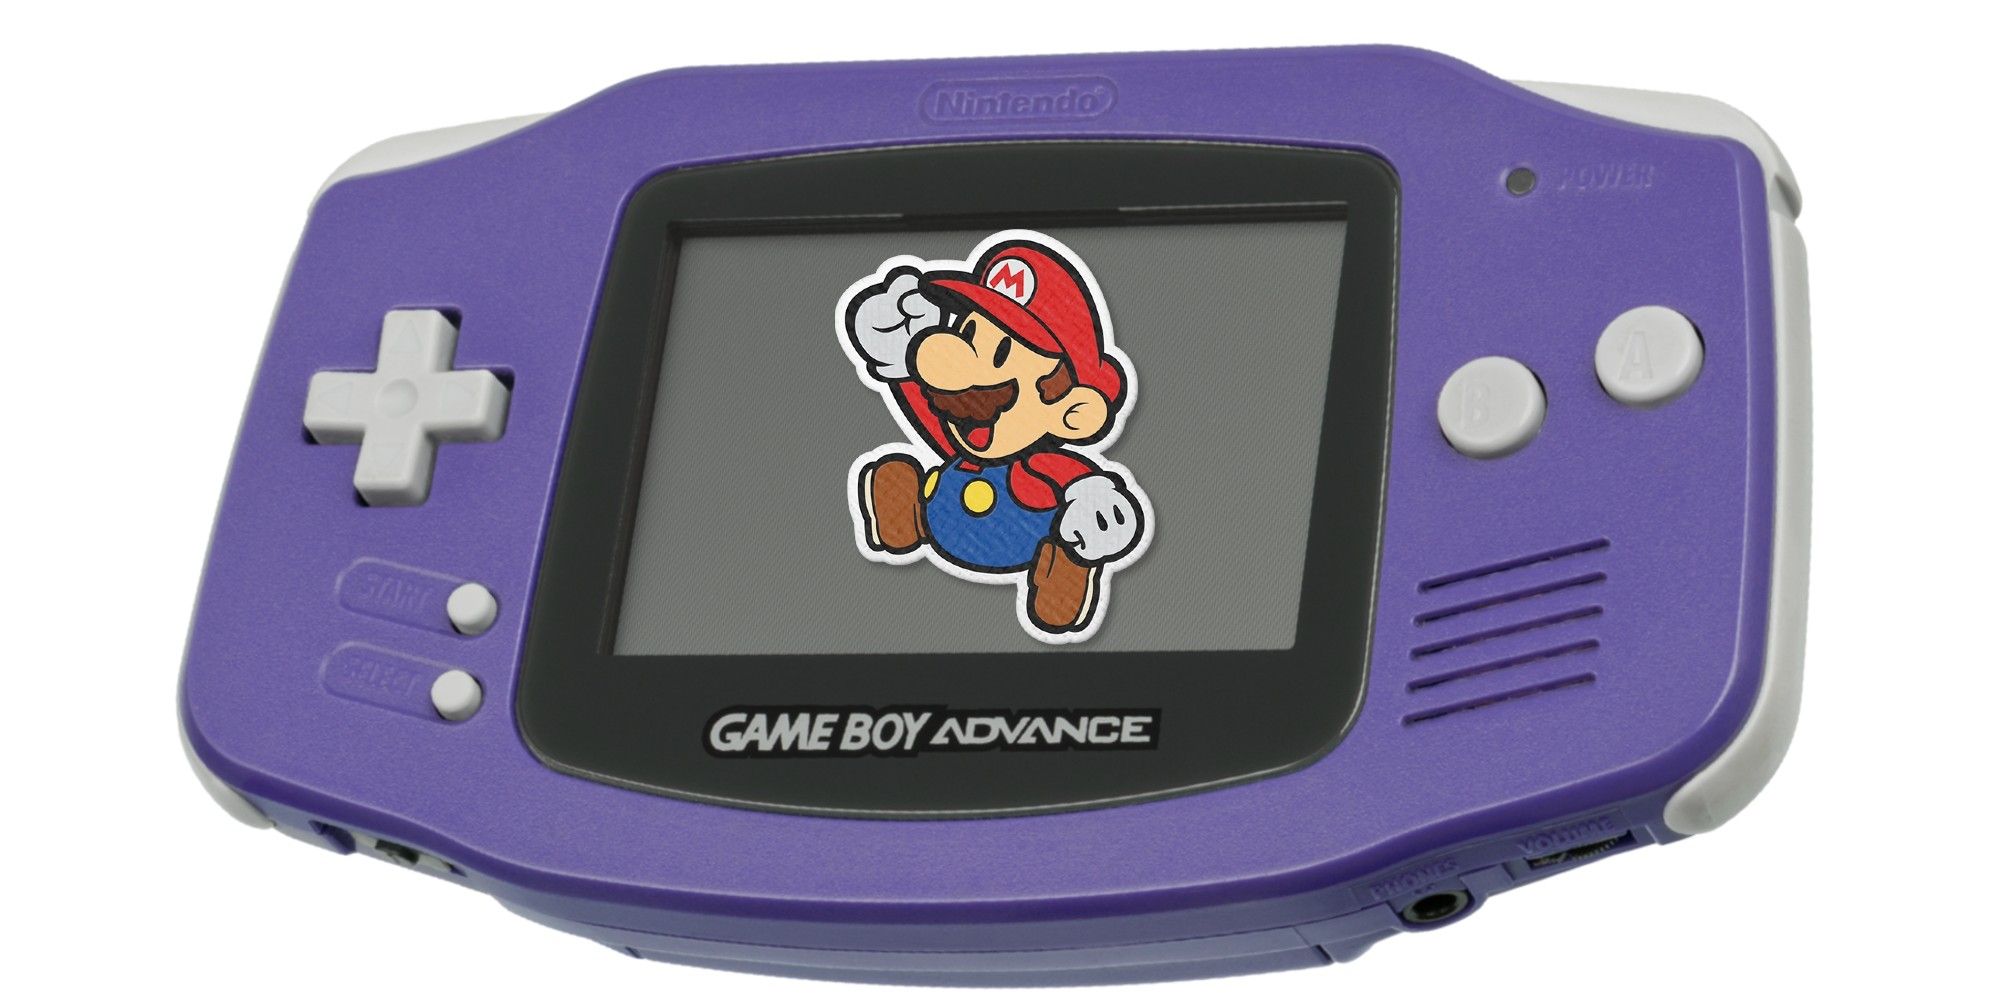 Paper Mario on the screen of a purple Game Boy Advance.